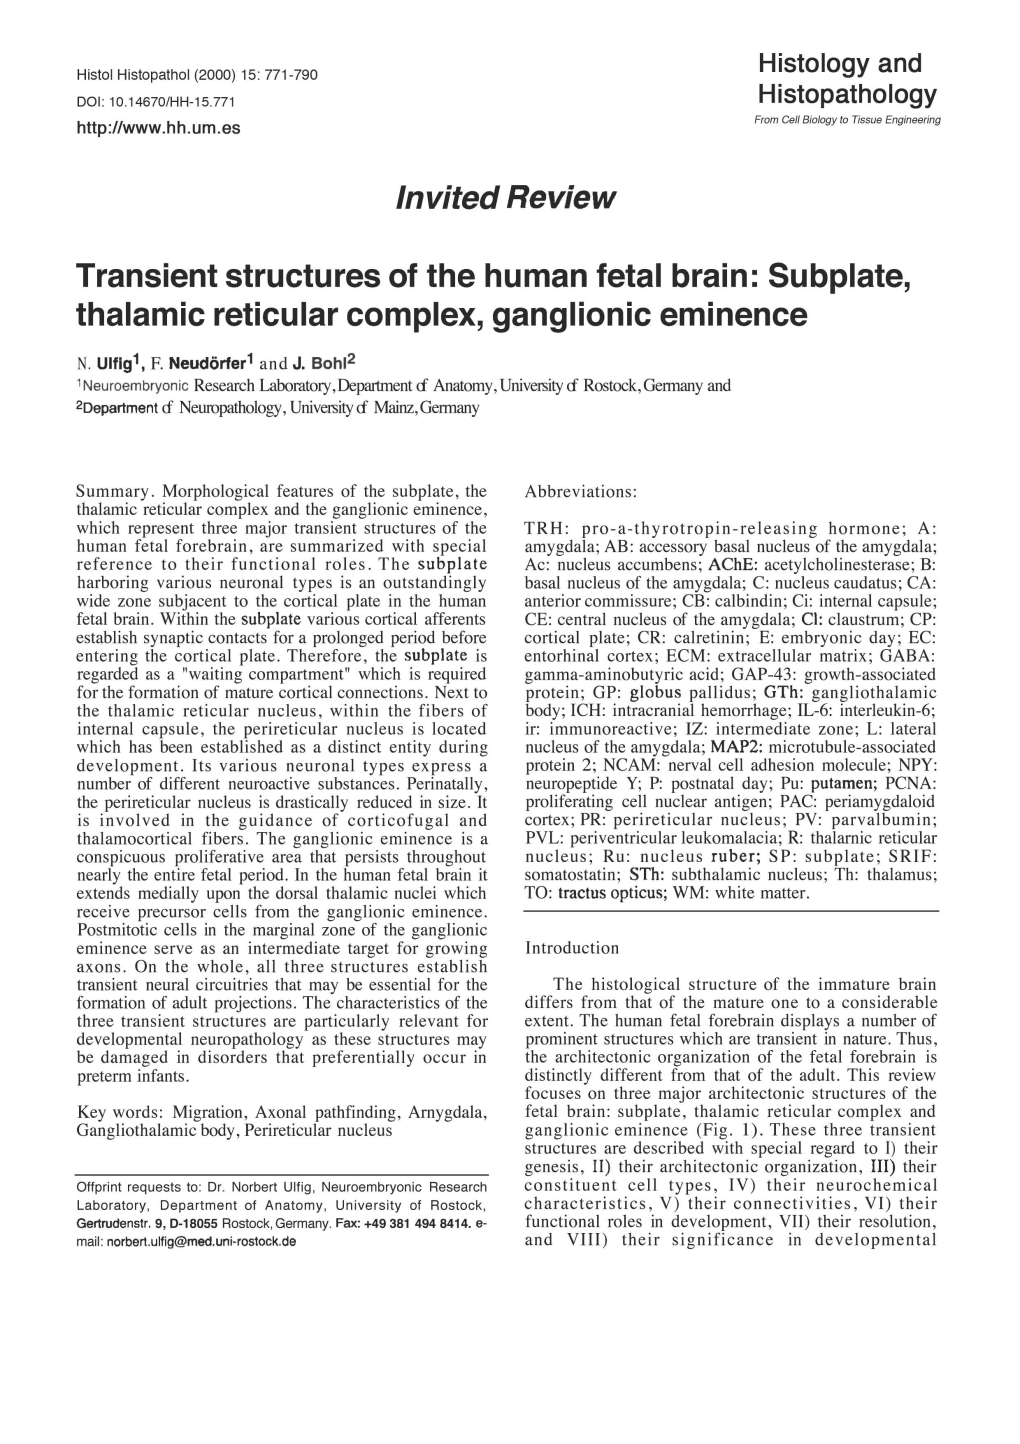 Transient Structures of the Human Fetal Brain. Subplate, Thalamic Reticular